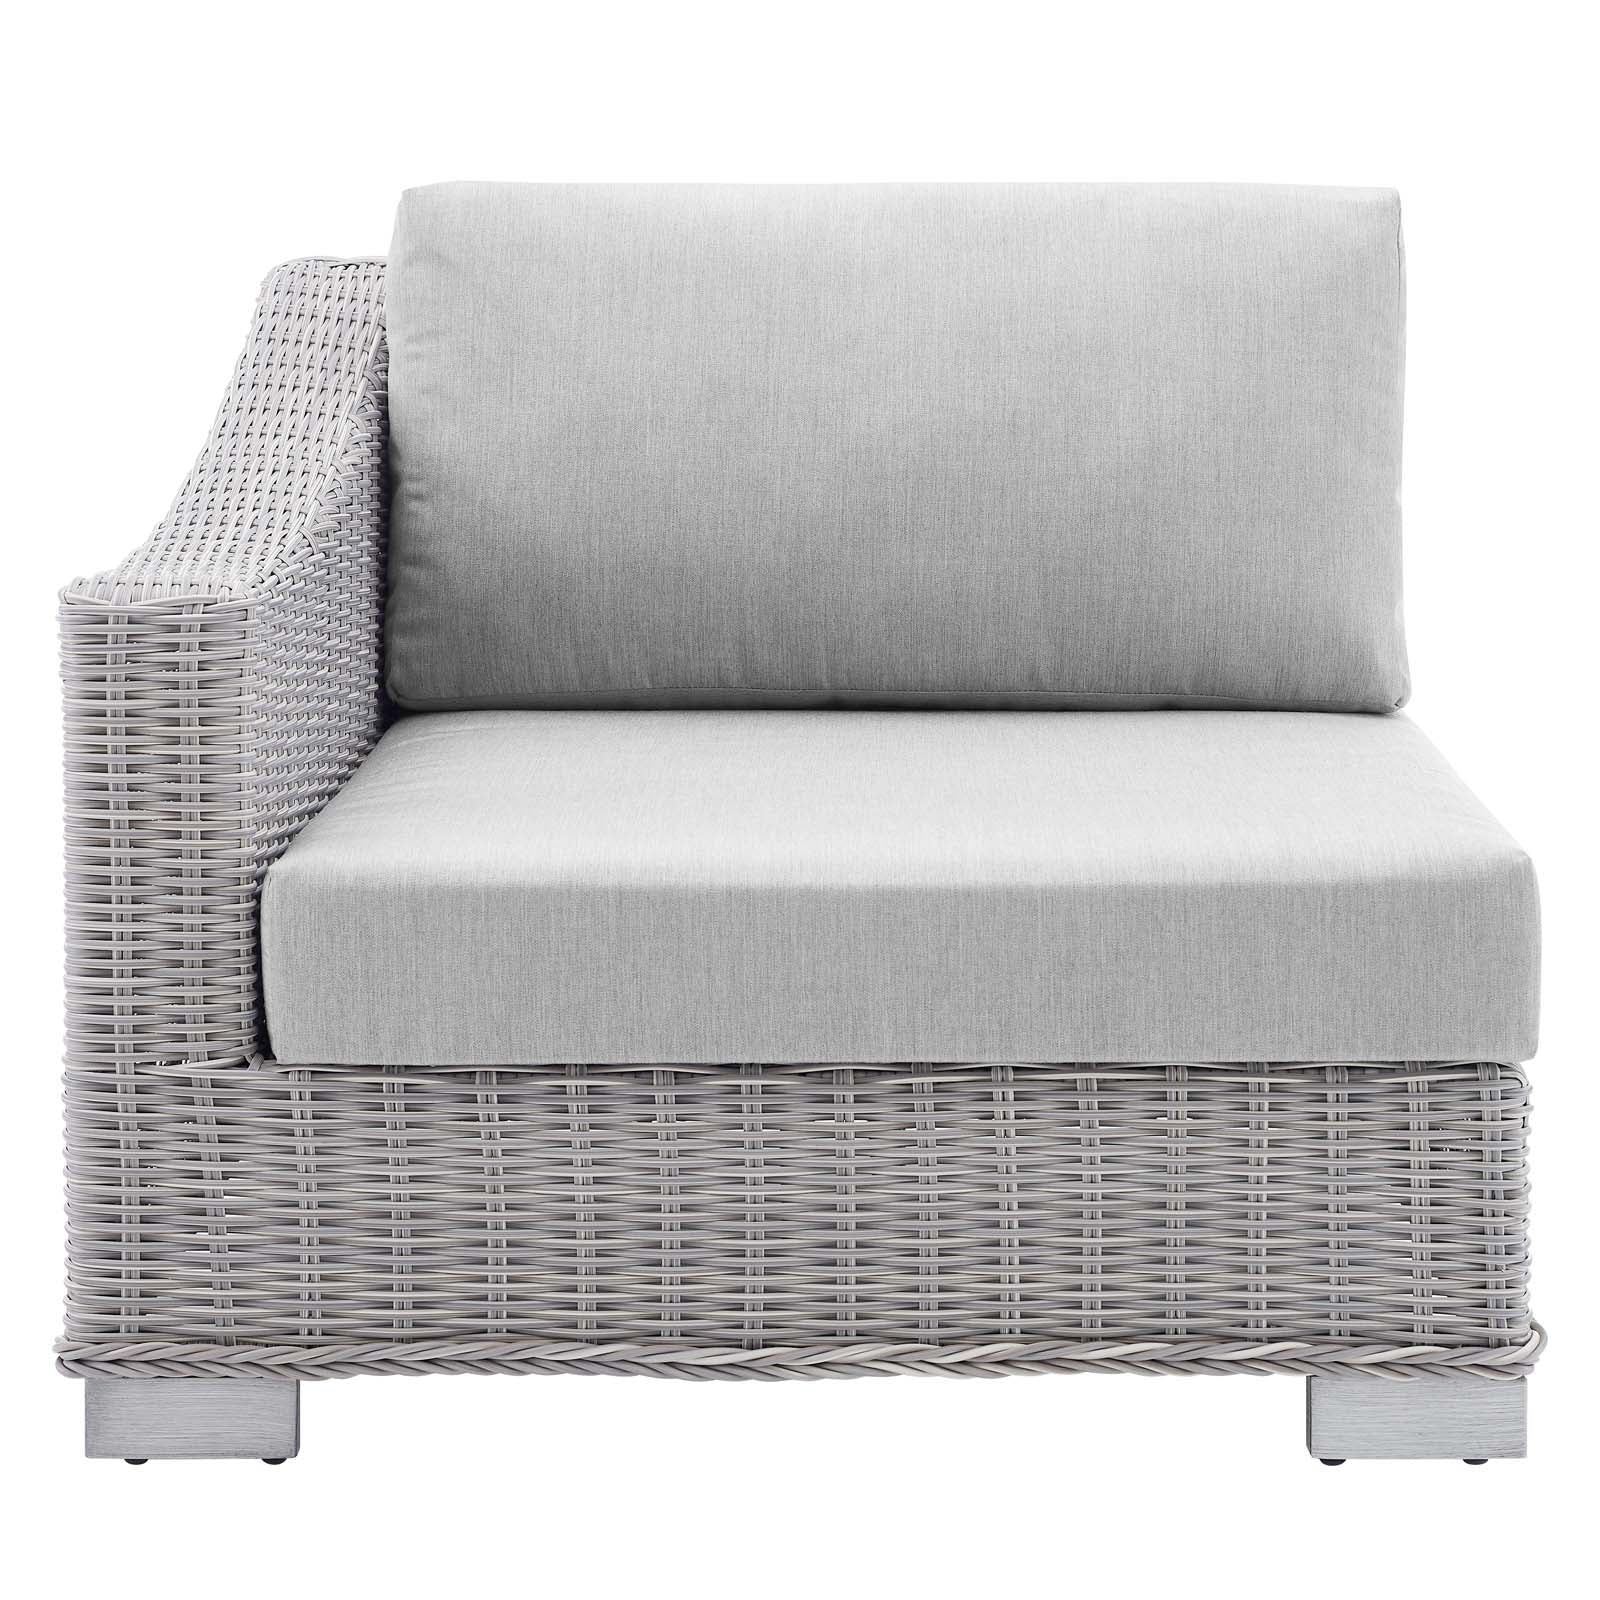 Modway Outdoor Chairs - Conway Sunbrella Outdoor Patio Wicker Rattan Left-Arm Chair Light Gray